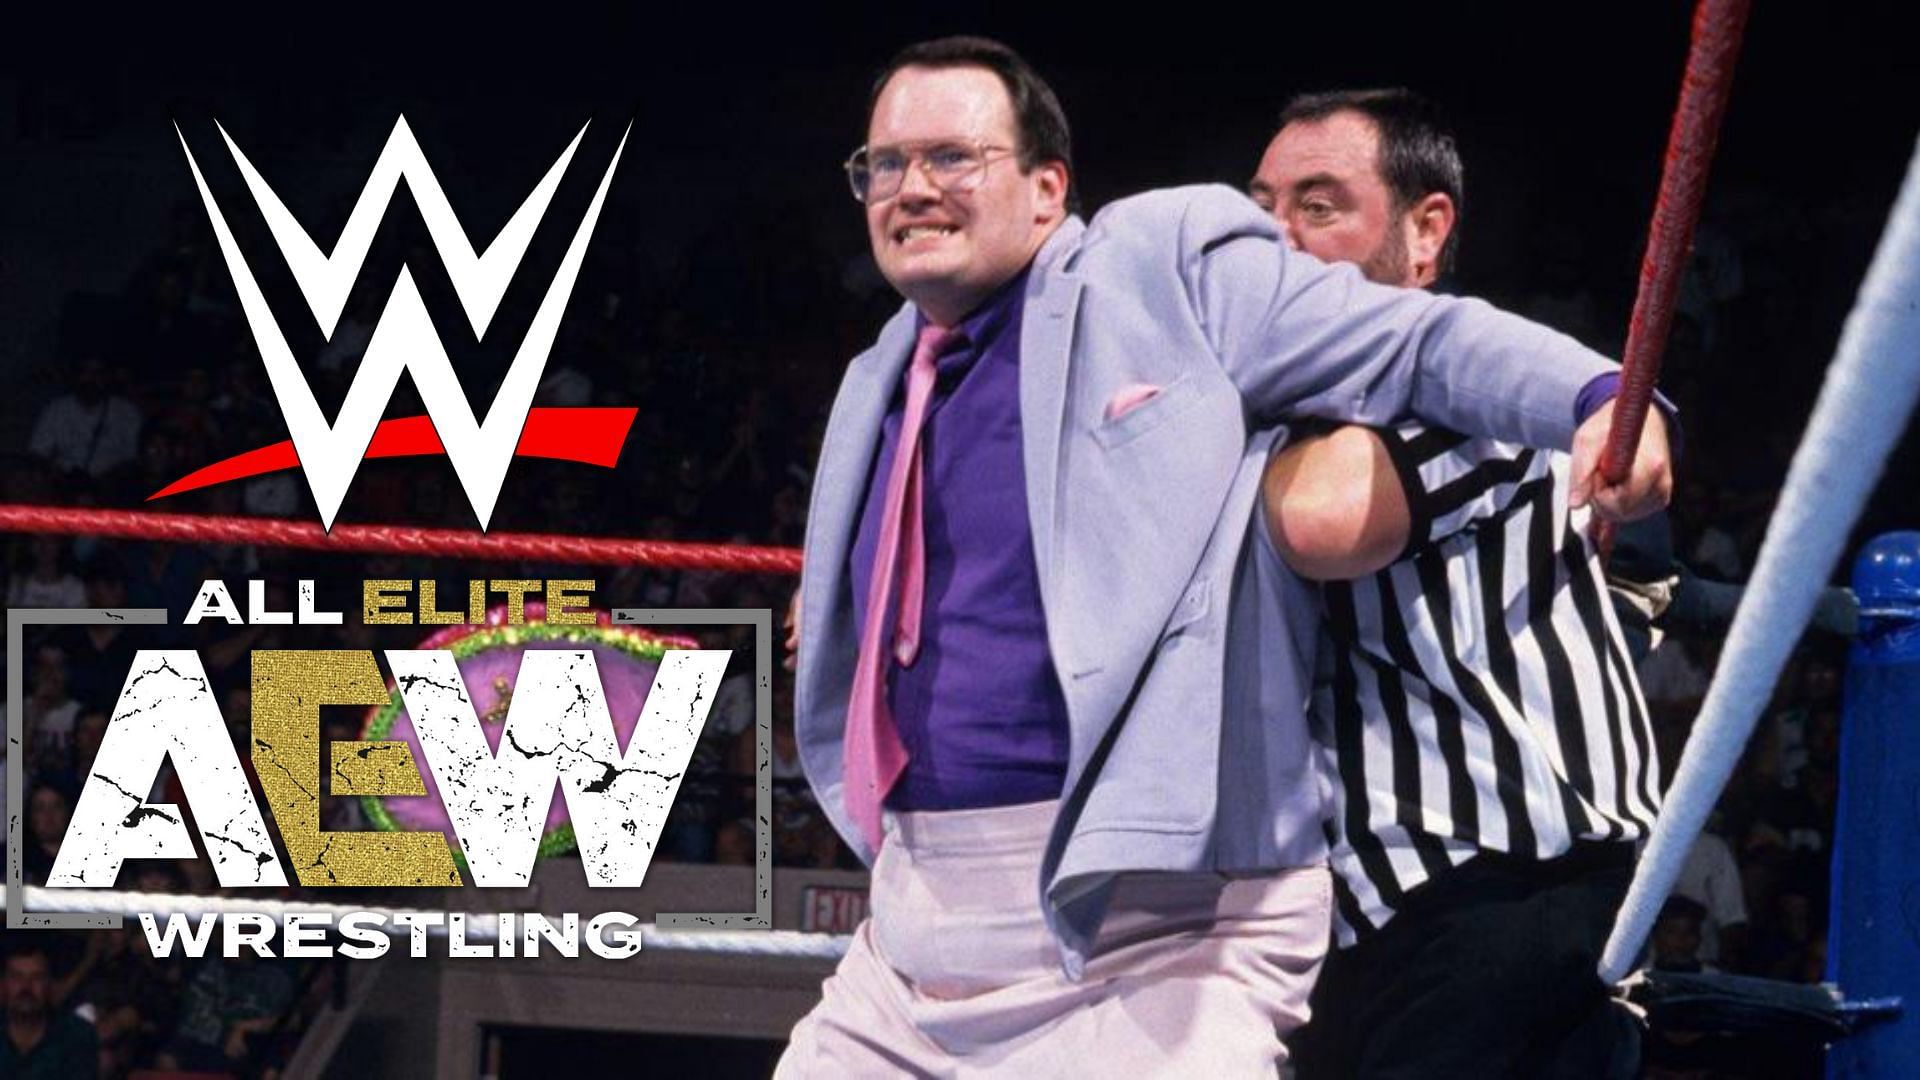 Is Jim Cornette correct about his assessments with these WWE Hall of Famers?